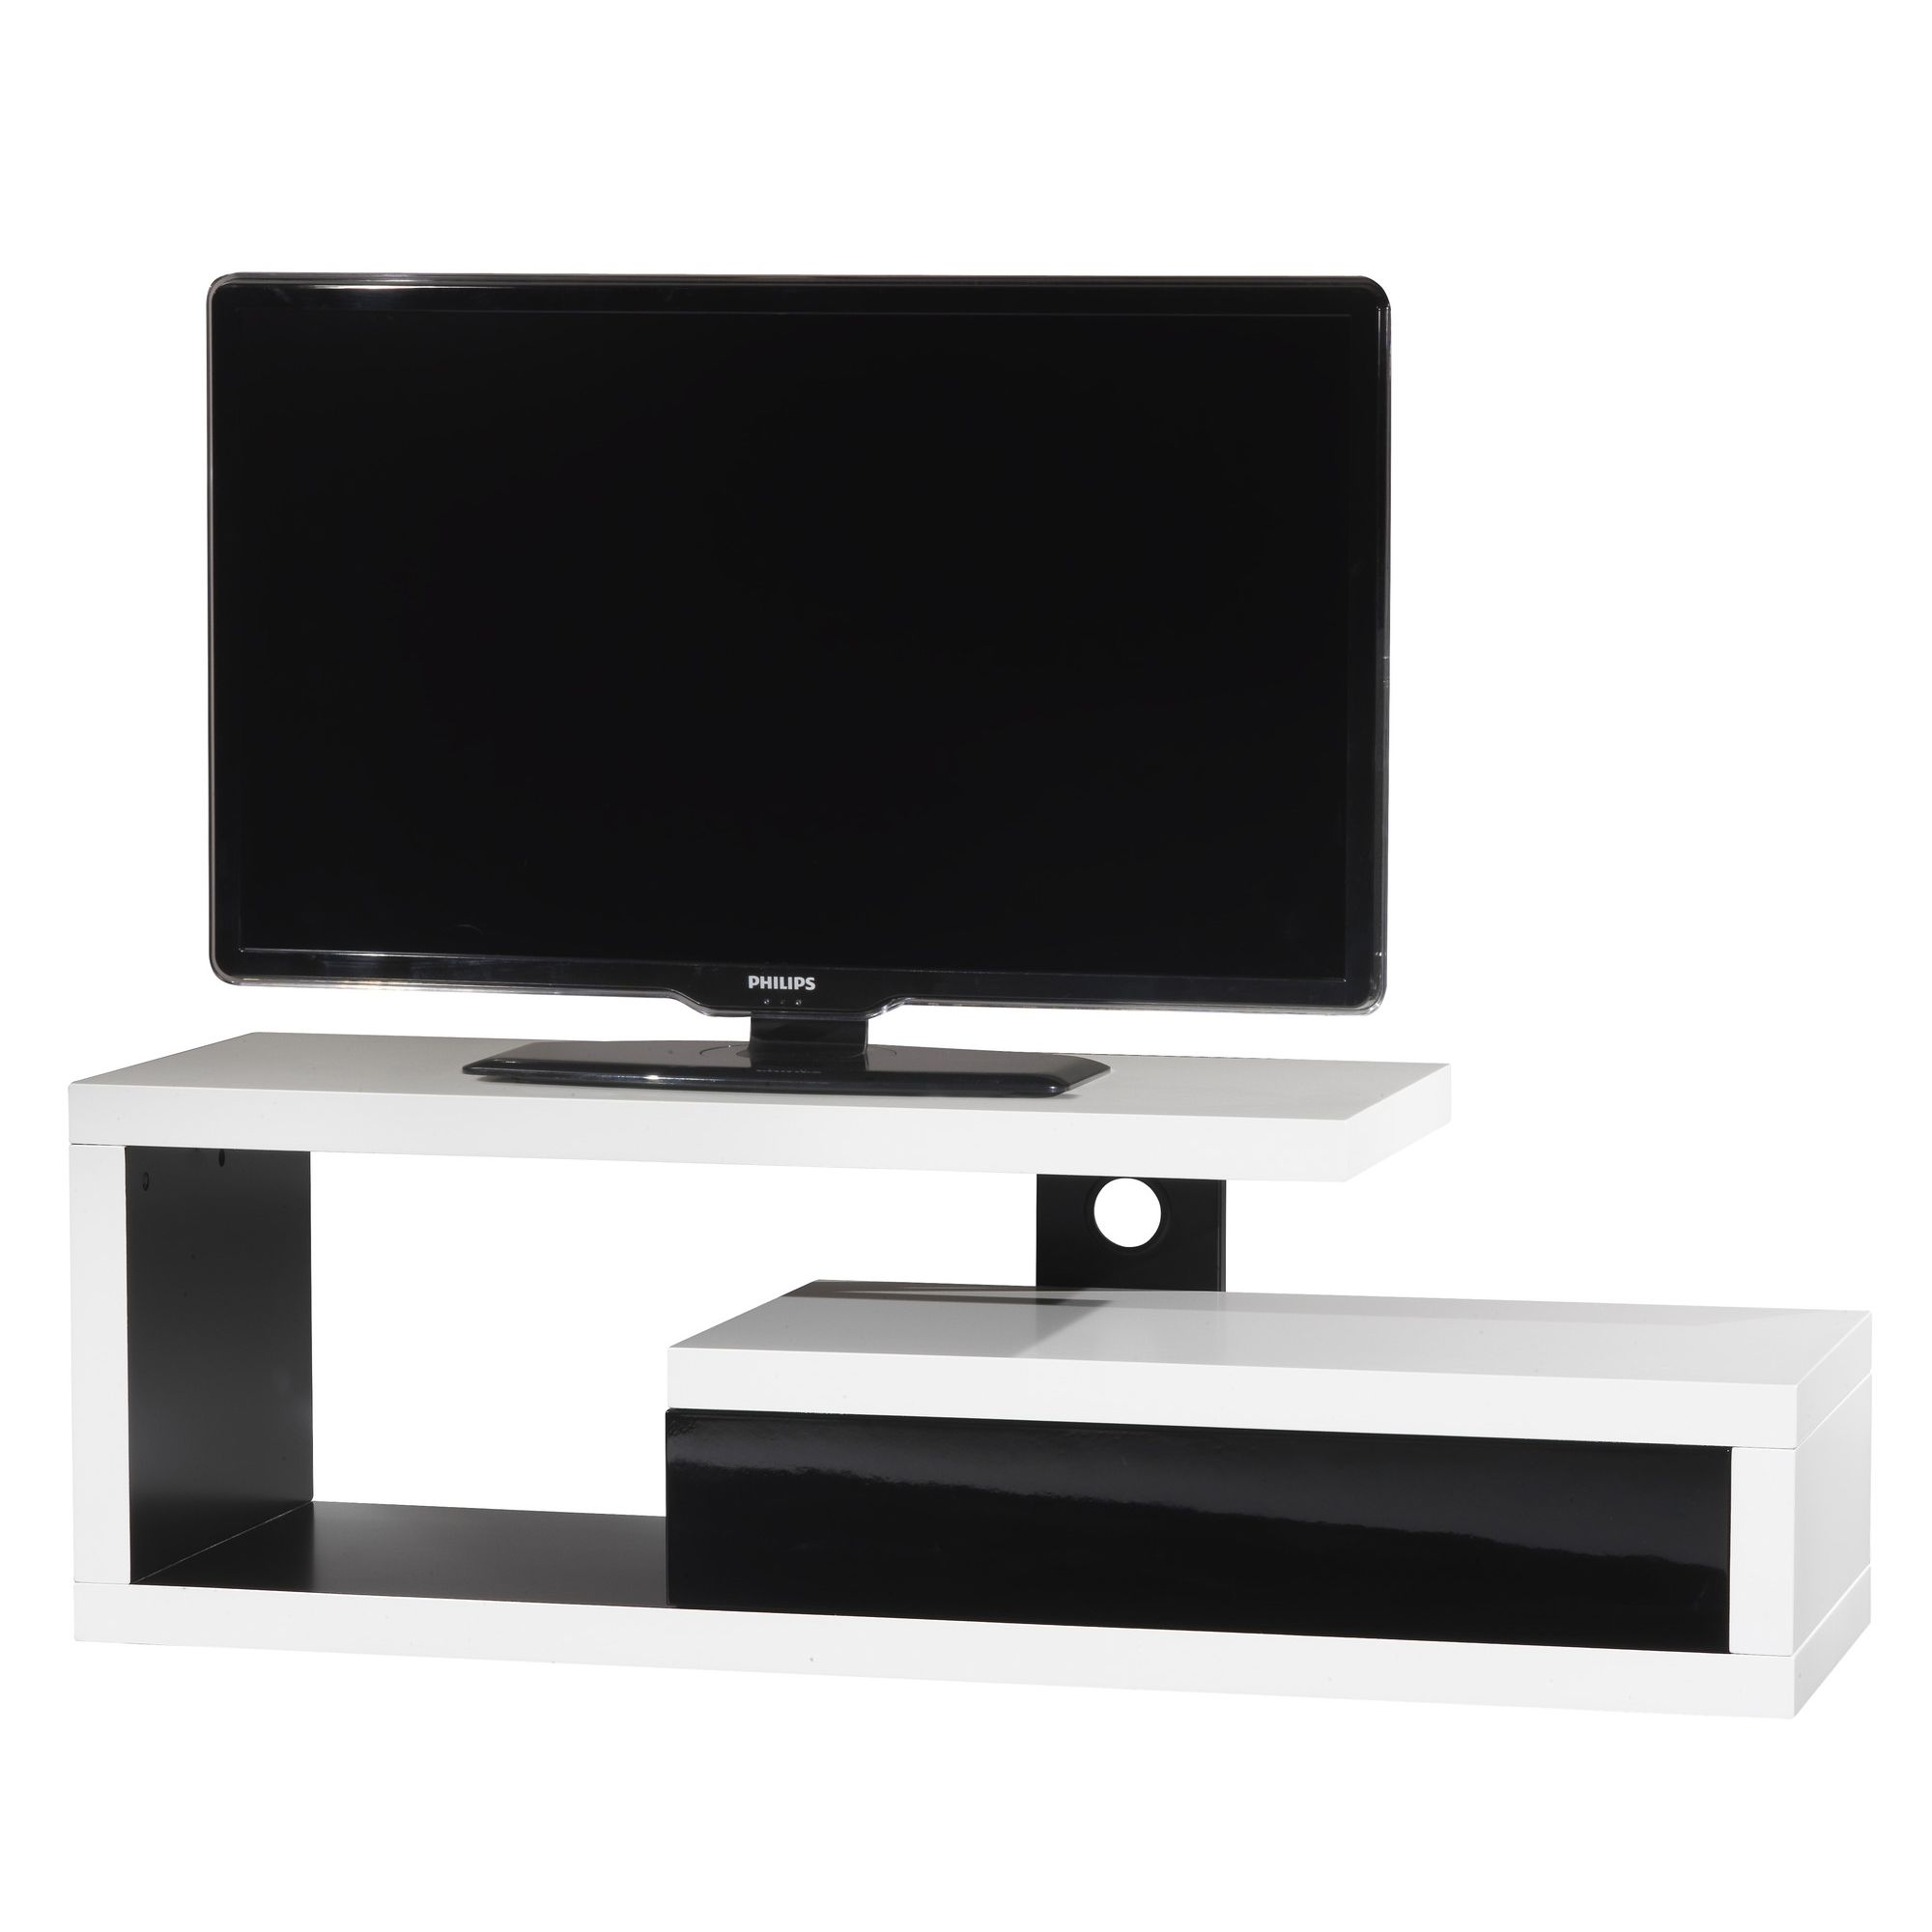 Ateca Vision Graphic TV Stand at Tesco Direct